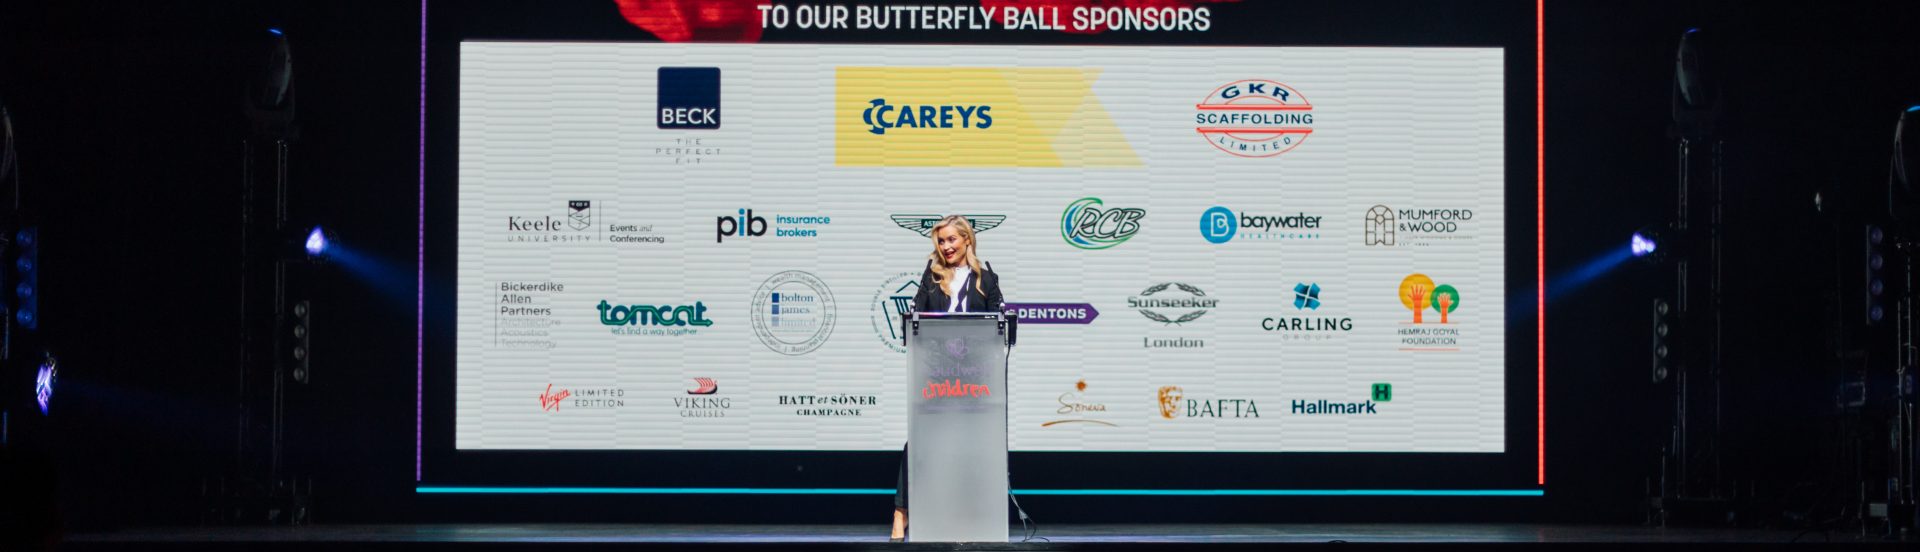 Laura Whitmore helps to raise over a life-changing £1.8 million at We Are All Different, Be You, Butterfly Ball